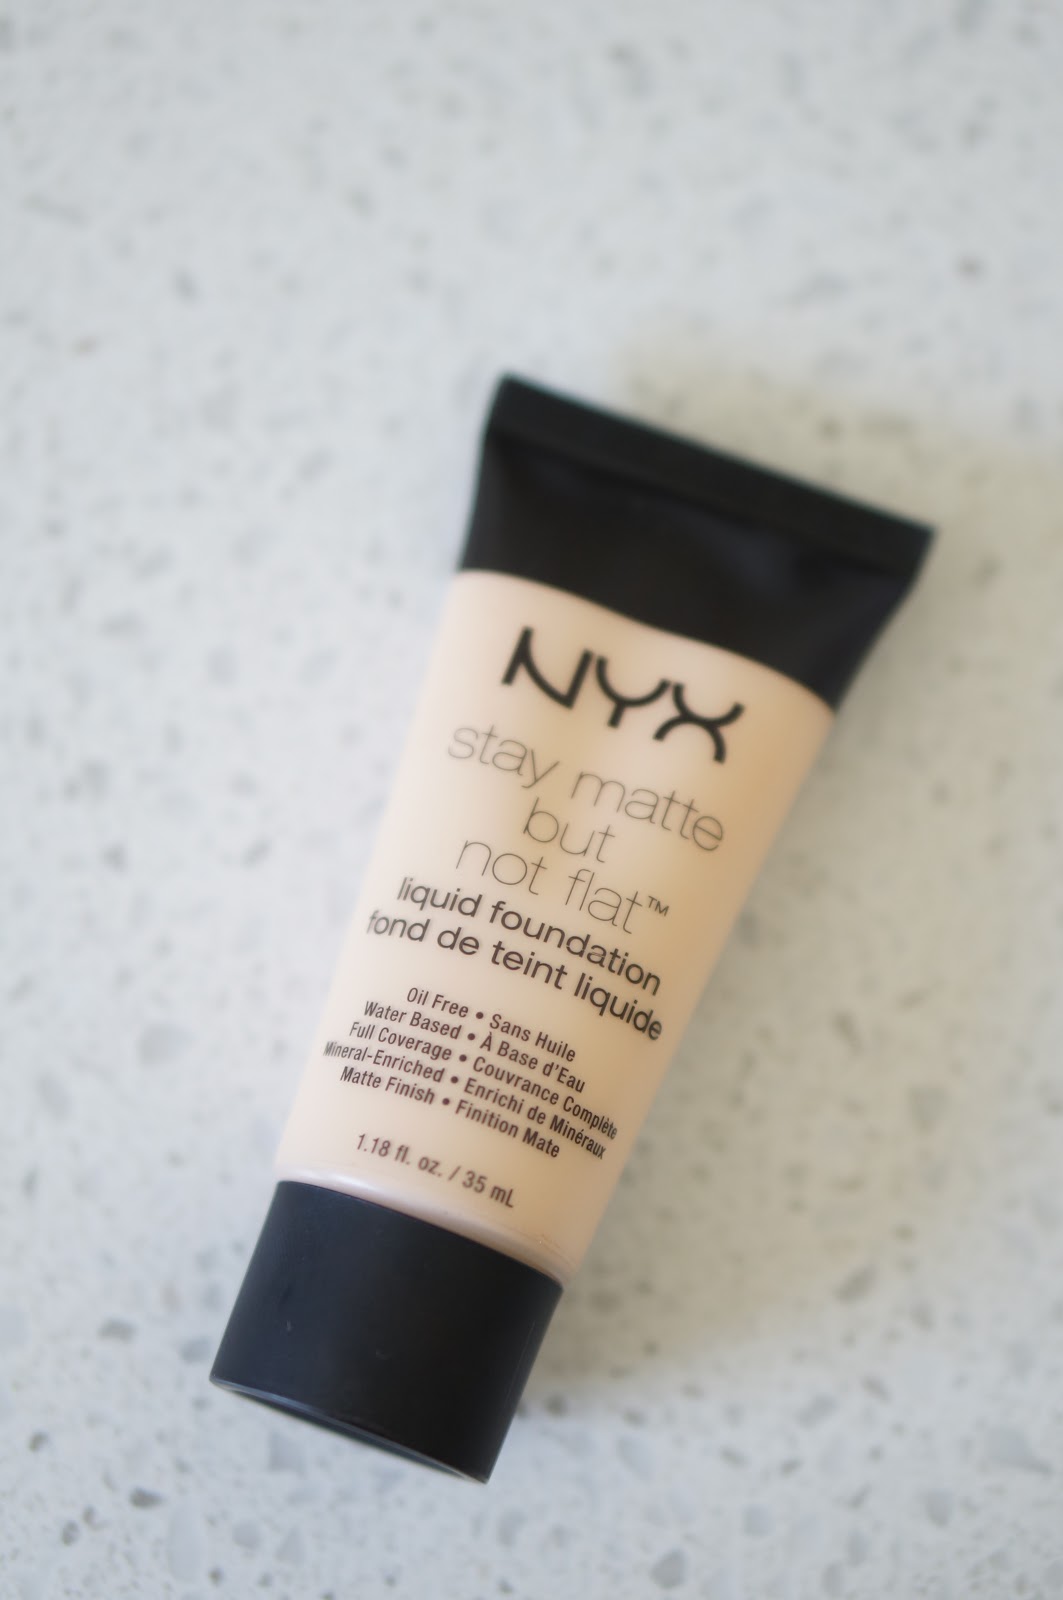 Popular North Carolina style blogger Rebecca Lately reviews the NYX Stay Matte Not Flat Foundation. Click to read her latest #foundationfriday!